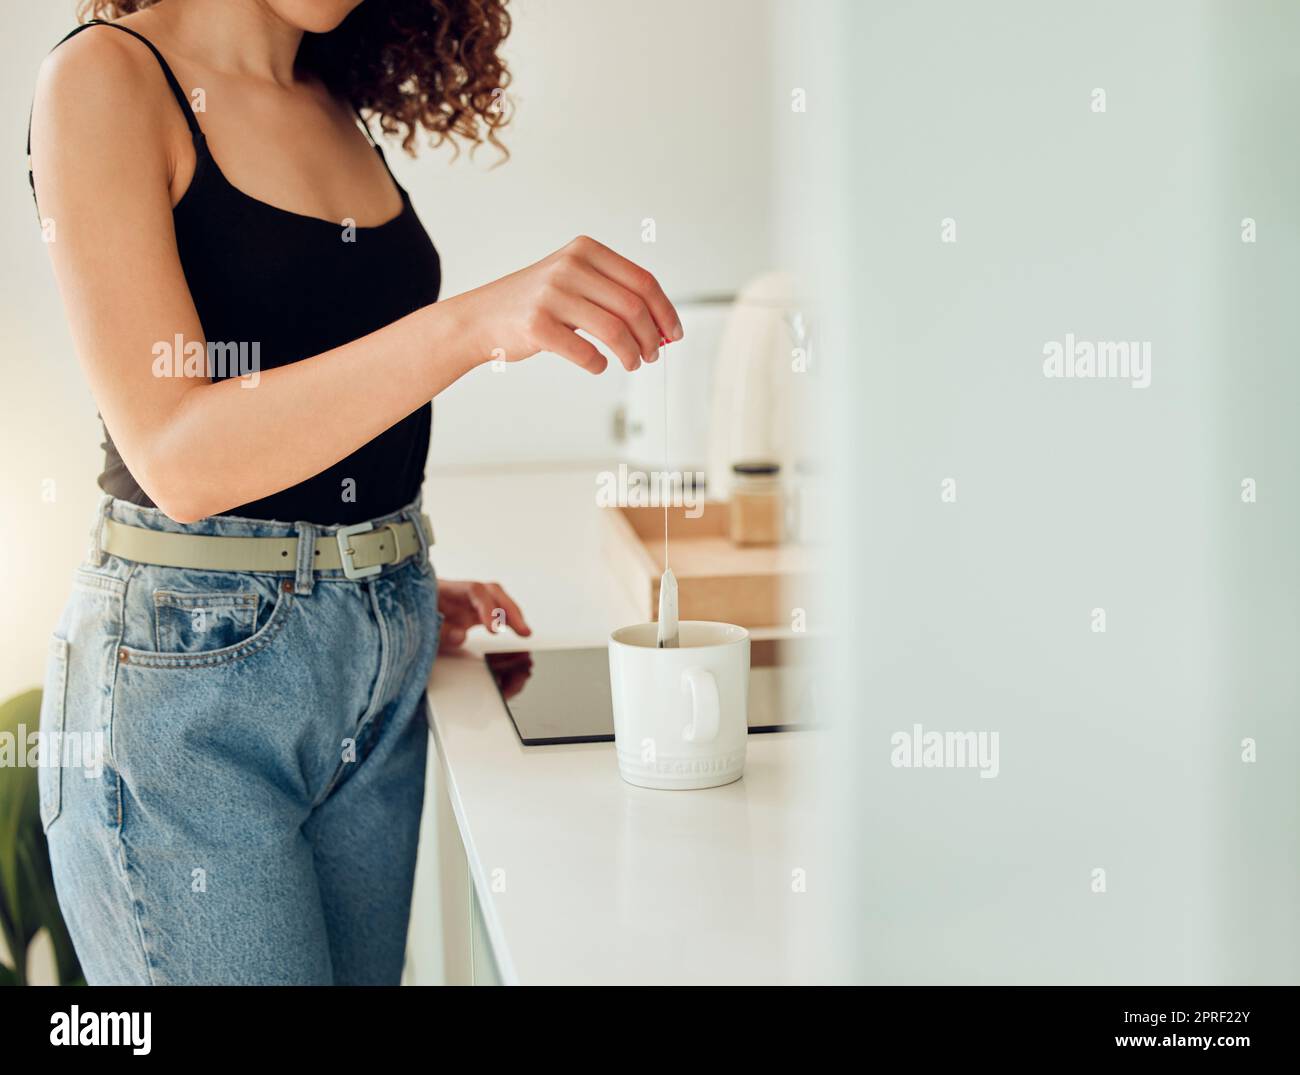 Woman hand holding herbal tea bag over cup of boiling water, making chai in kitchen taking a break. Female barista woman working at cafe or coffee shop counter, hot drink during office lunch break. Stock Photo